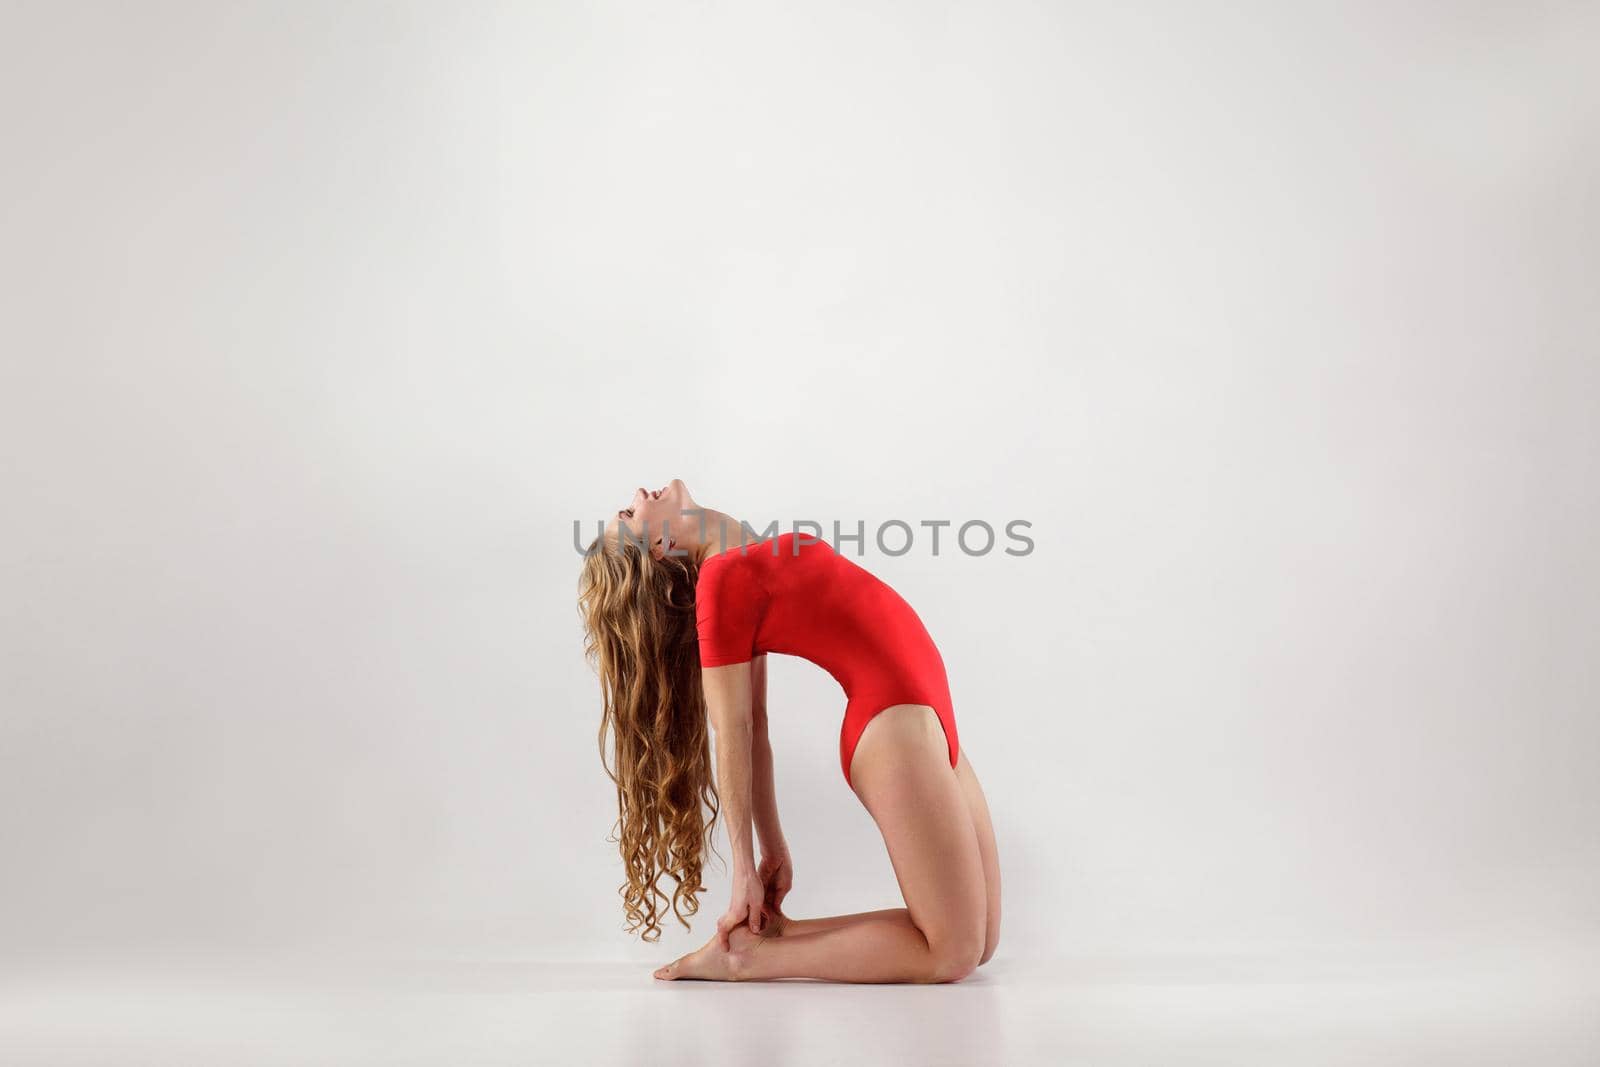 blonde woman with long curly hair in red leotard balancing on hands and knees while doing ustrasana camel yoga pose. indoor, on light gray background. healthy lifestyle and leisure activity concept